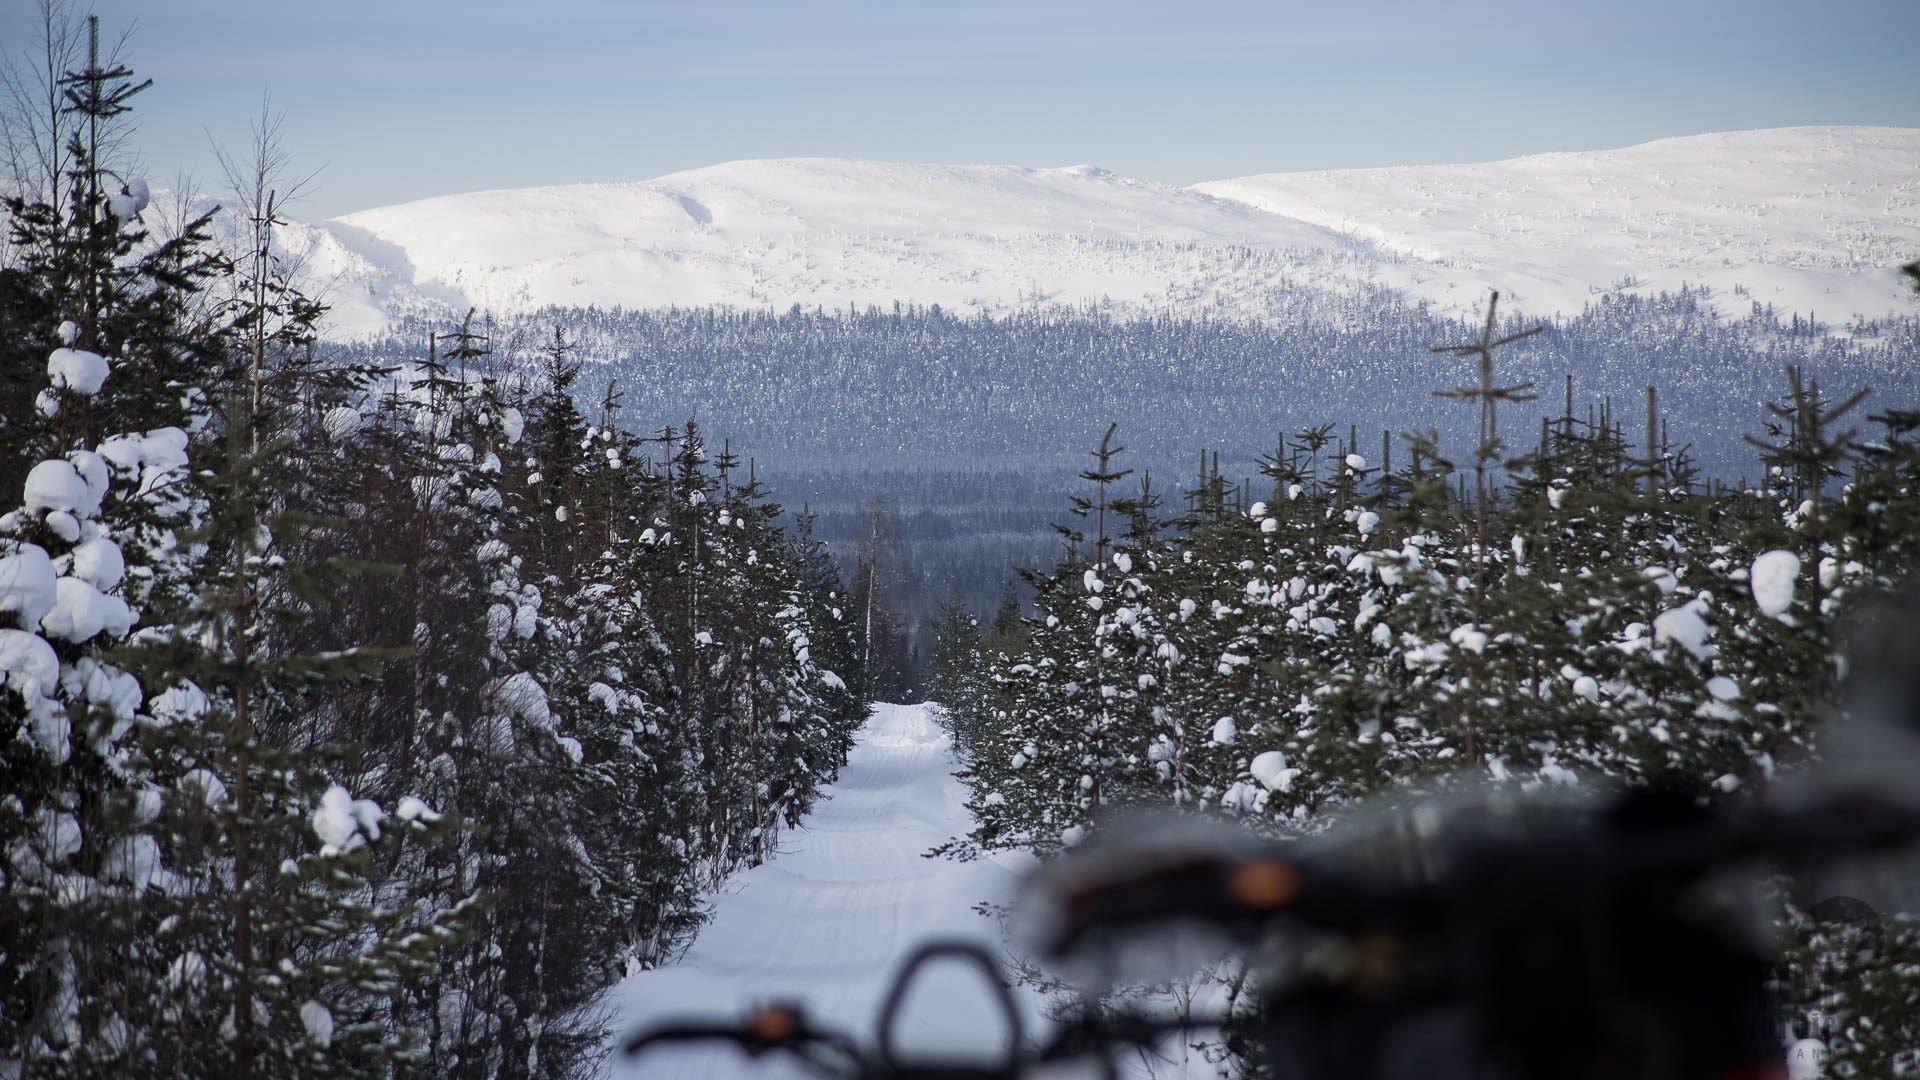 Rovaniemi / Arctic Expeditions - Tour de Lapland. Point of view: on a snowmobile about to ride down a snowy hill surrounded by forest, big snowy hills on background. Wild Nordic Finland @wildnordicfinland